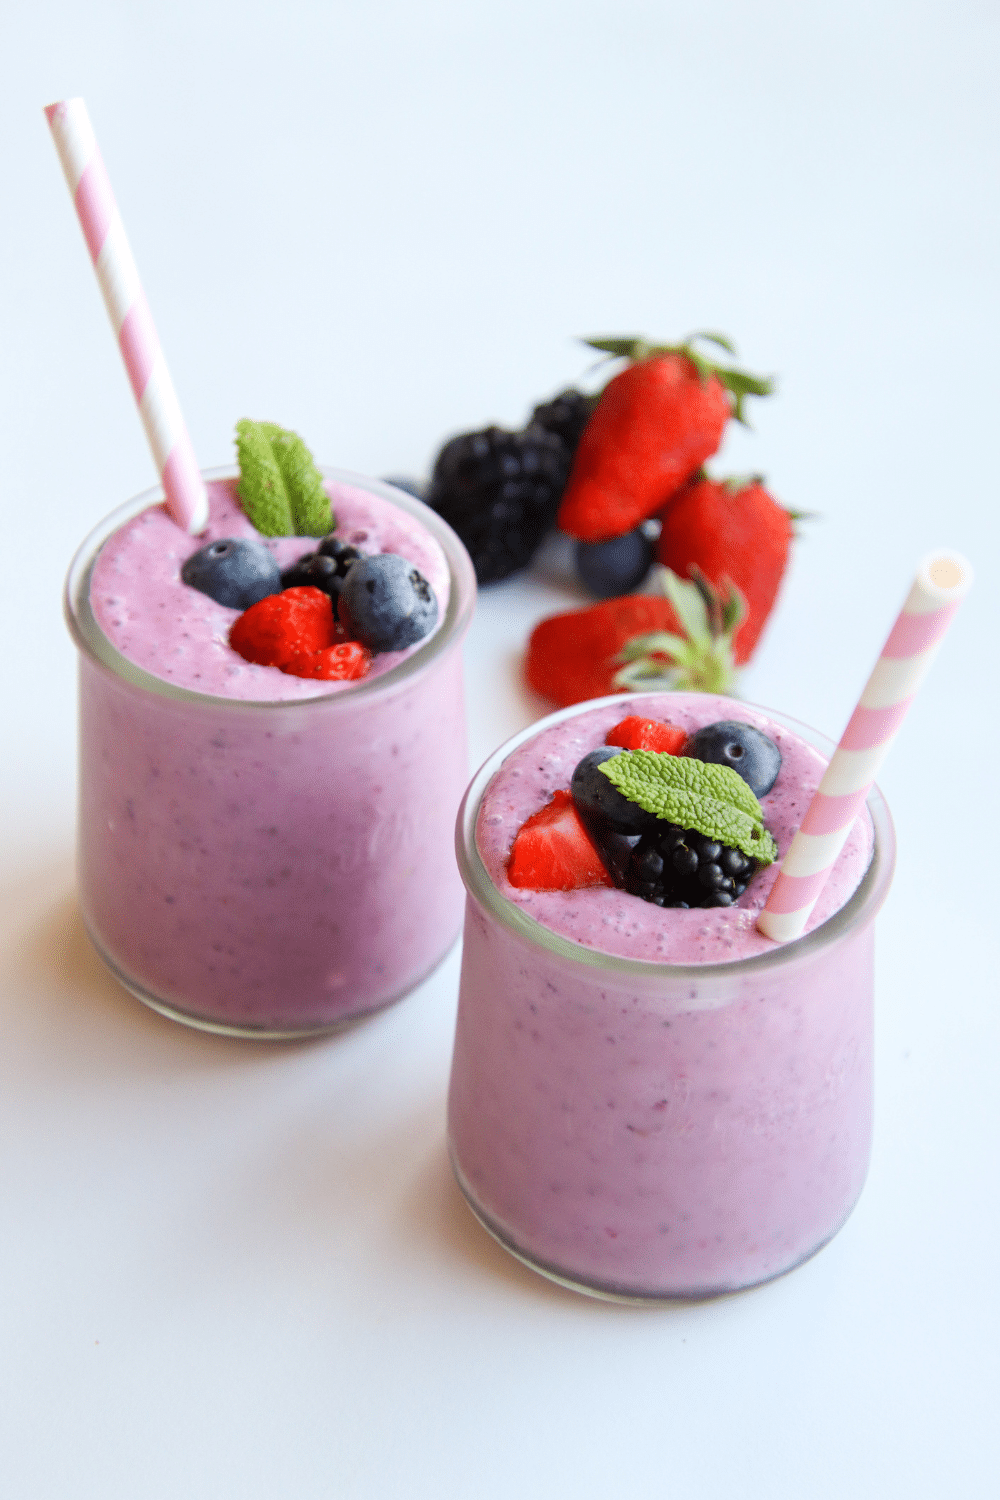 A vibrant berry-colored smoothie in a glass, topped with an assortment of fresh berries.